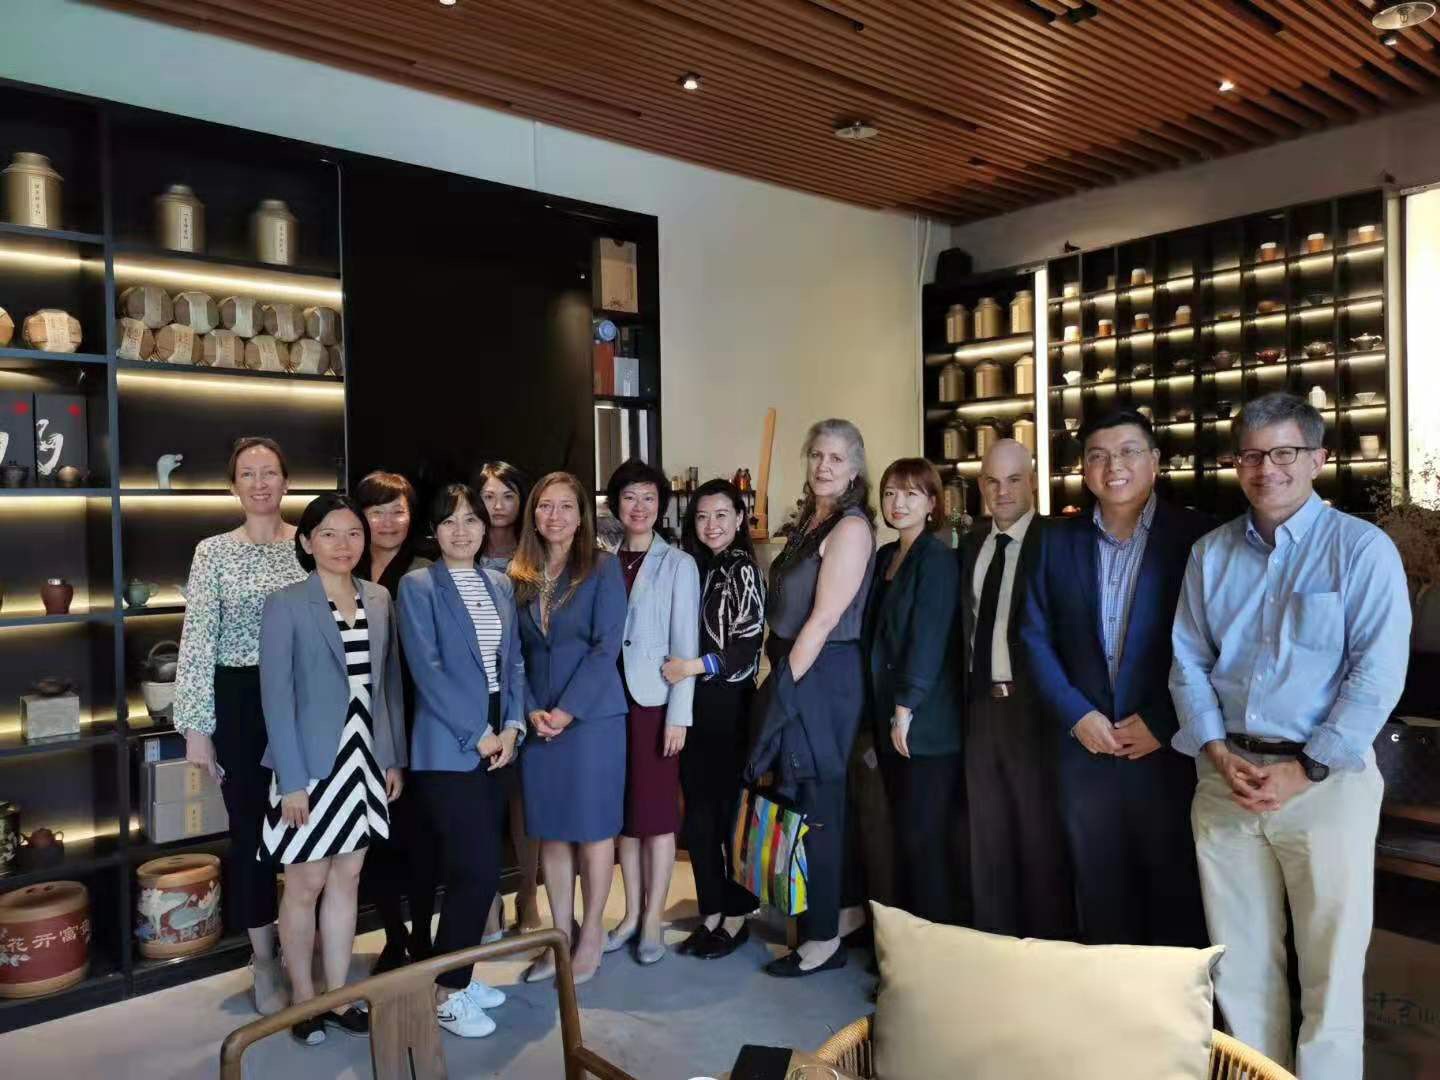 Jing poses with a group of EducationUSA professionals in Beijing.